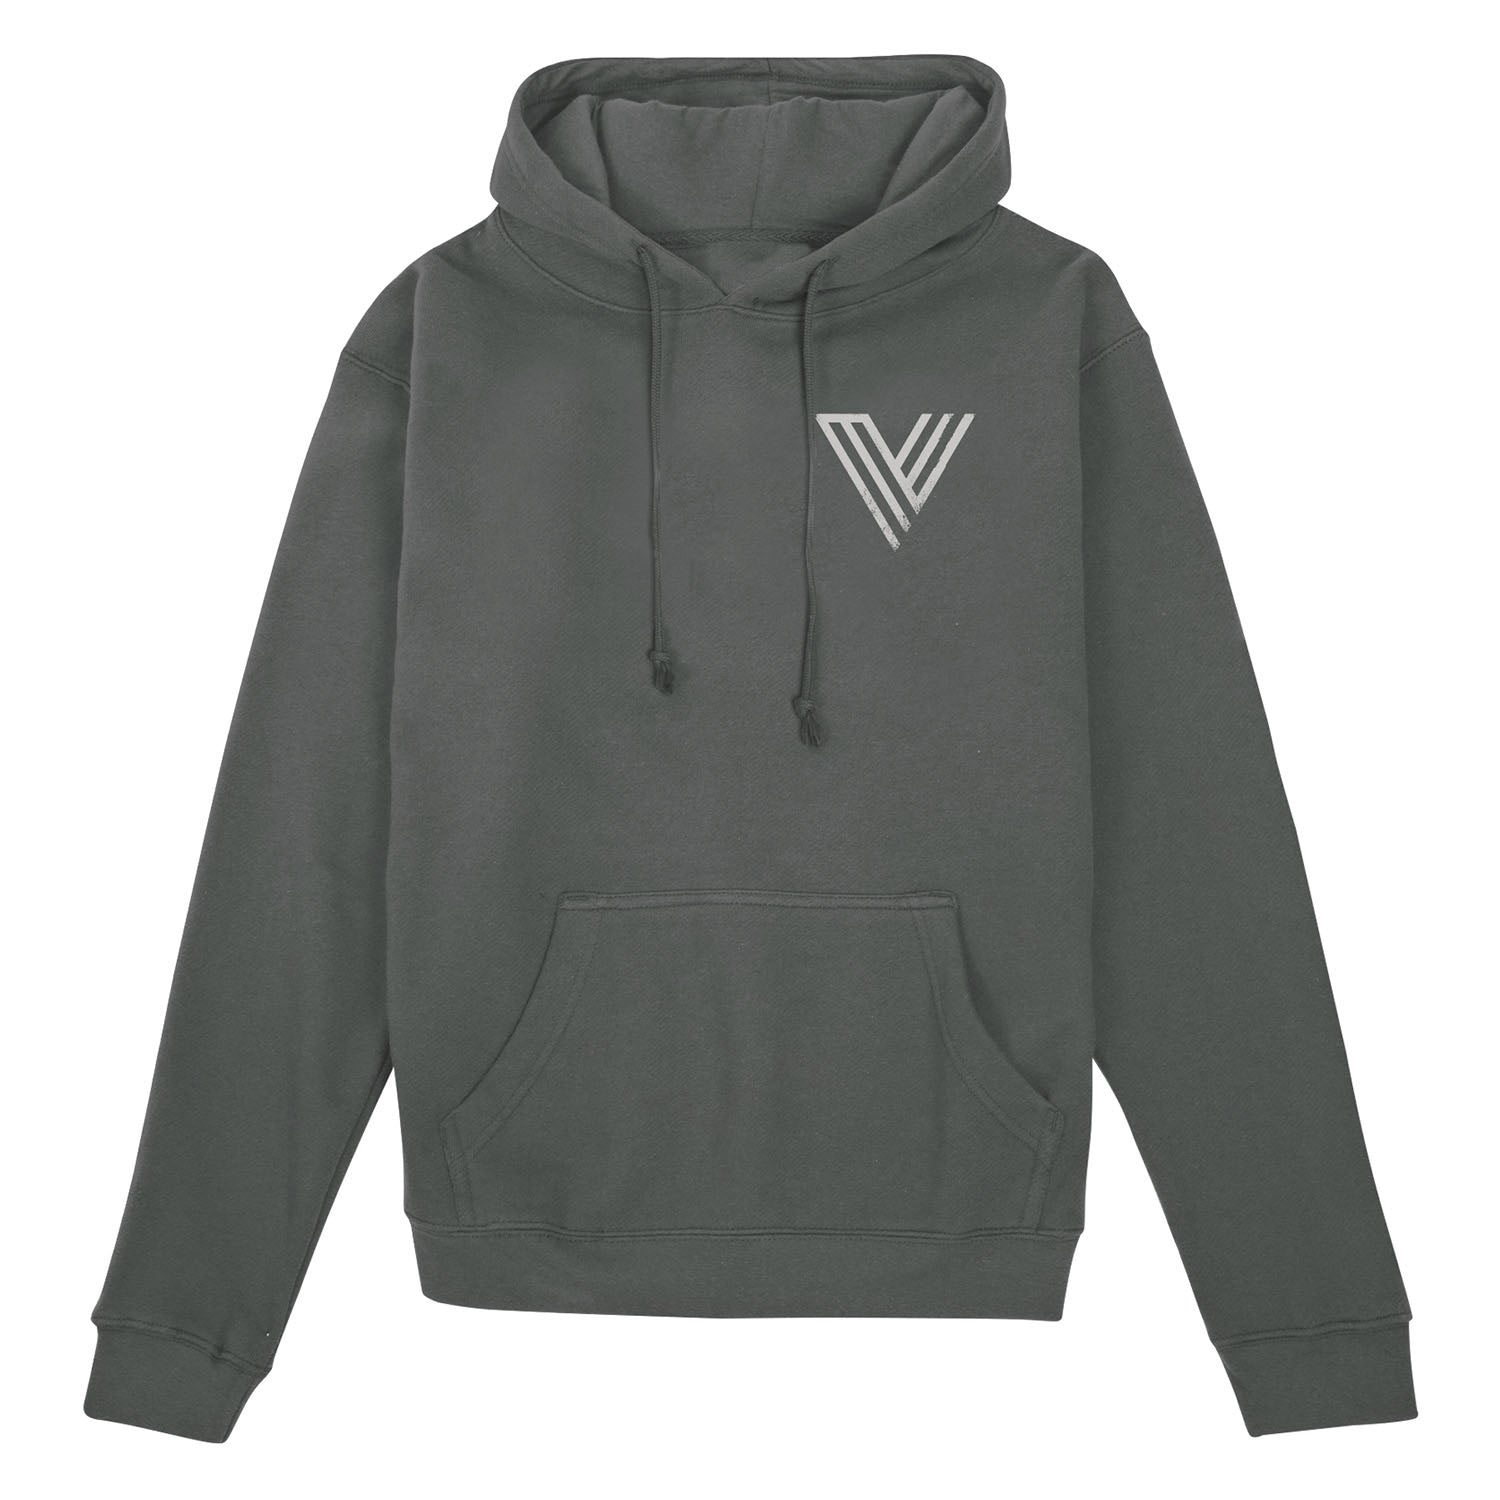 Call of Duty Vanguard Olive Task Force One Hoodie - Front View